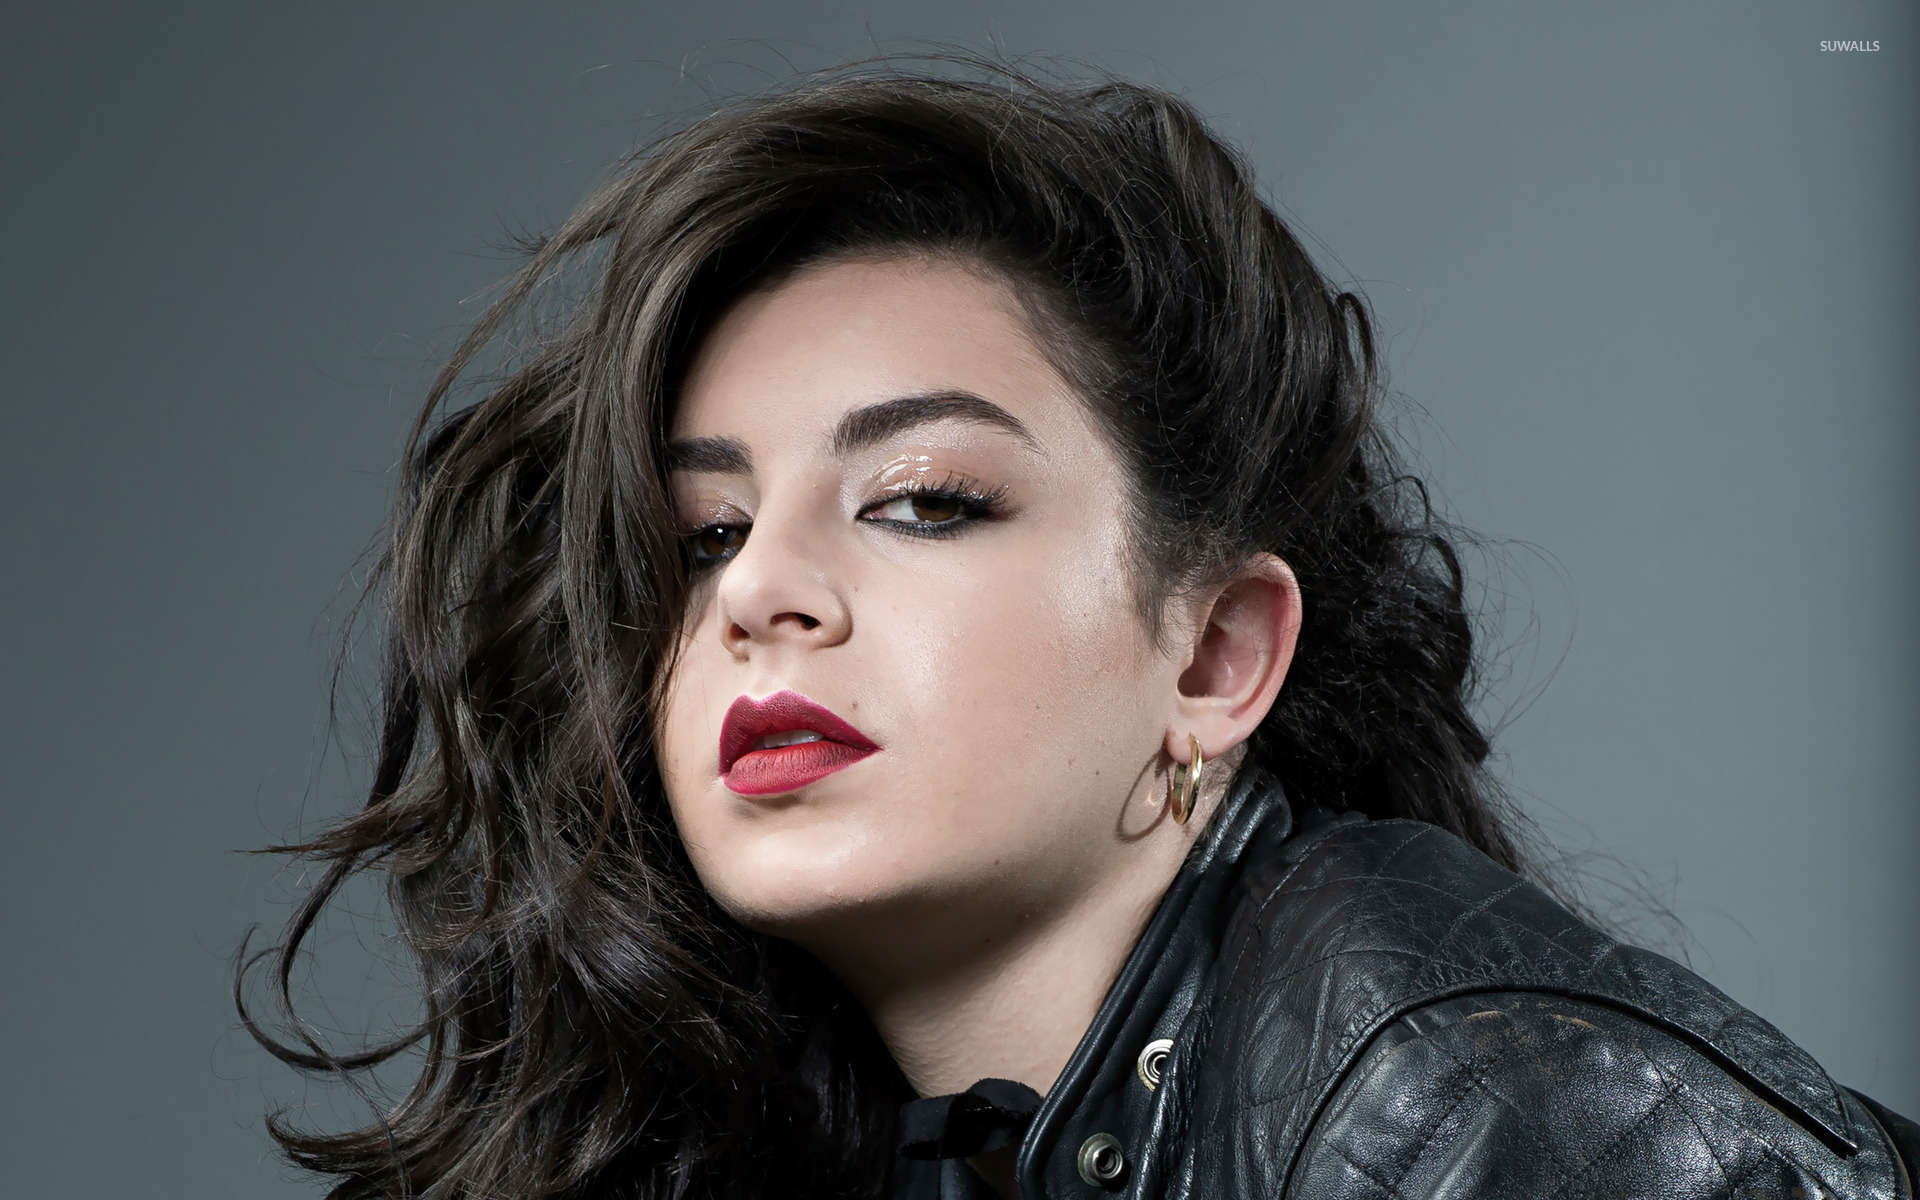 Charli XCX wallpaper - Celebrity wallpapers - #32255